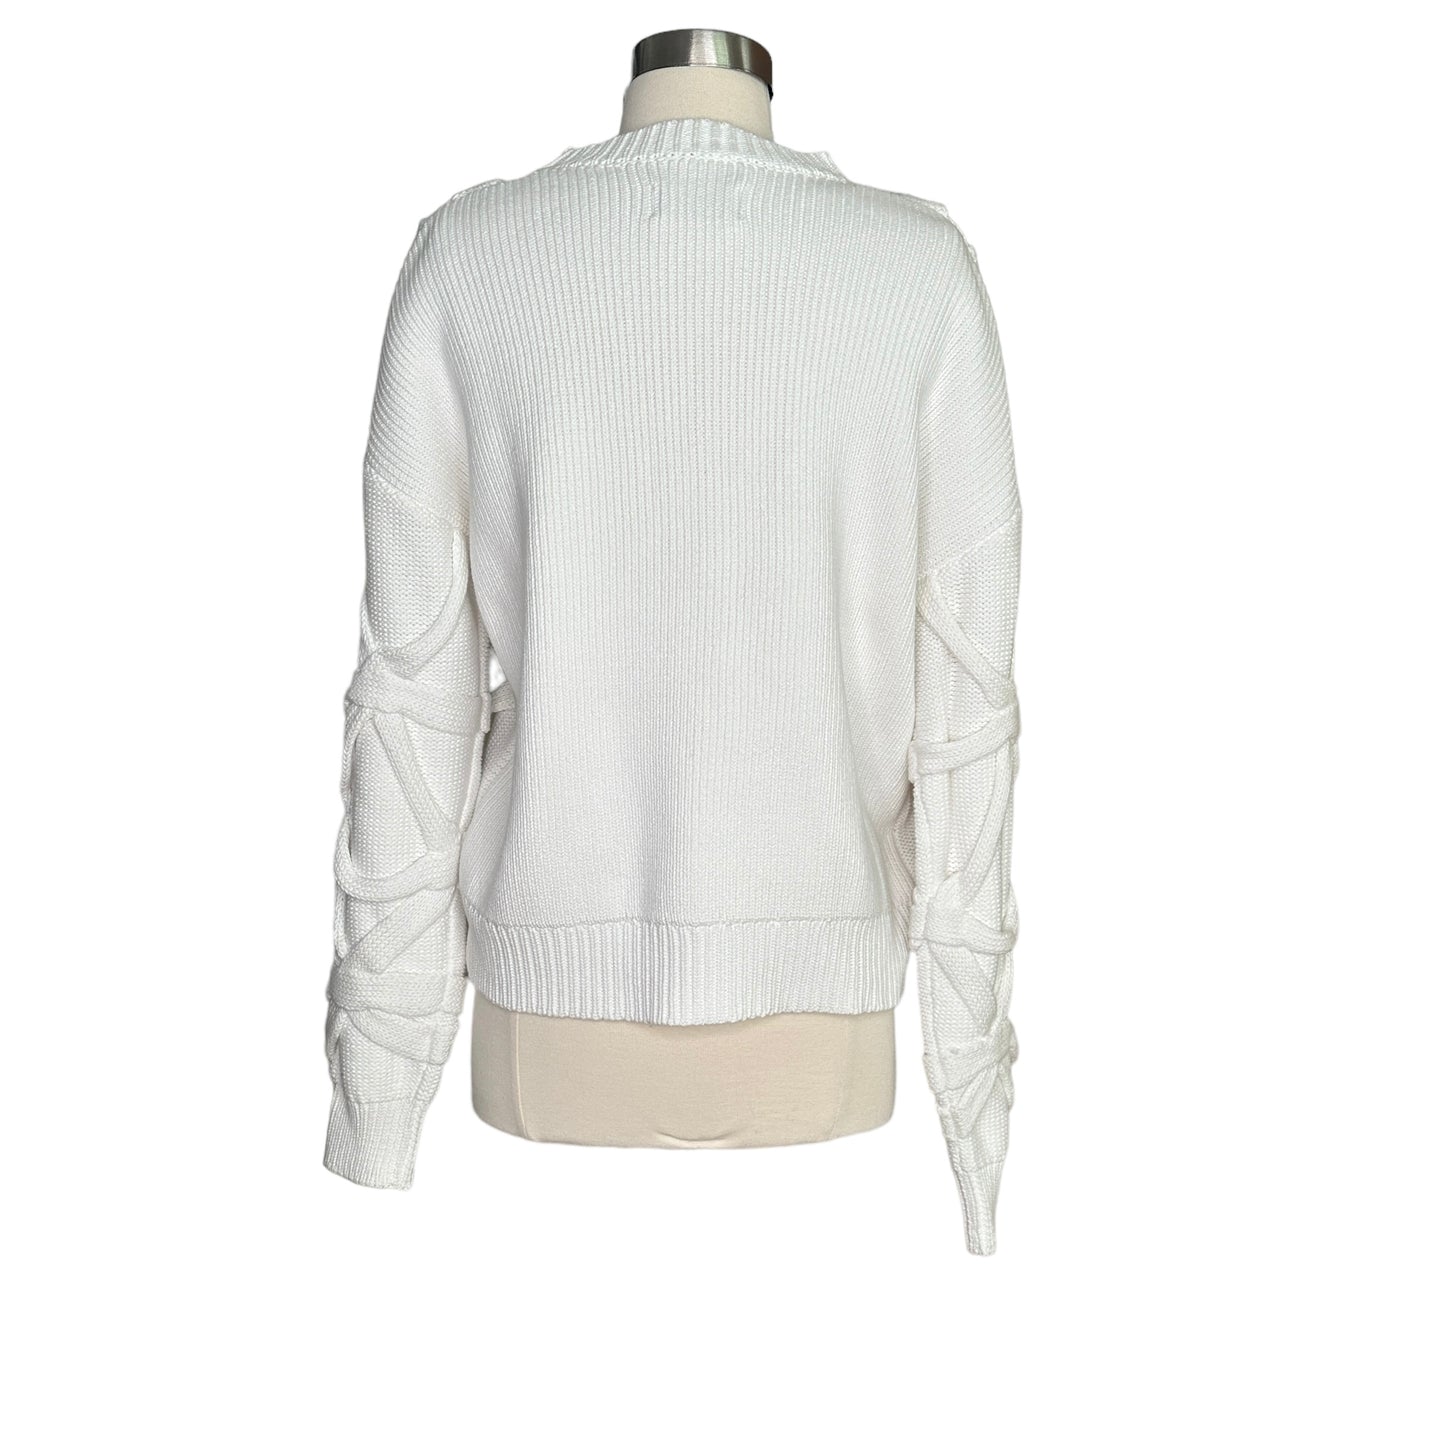 White Contrast Sweater - M